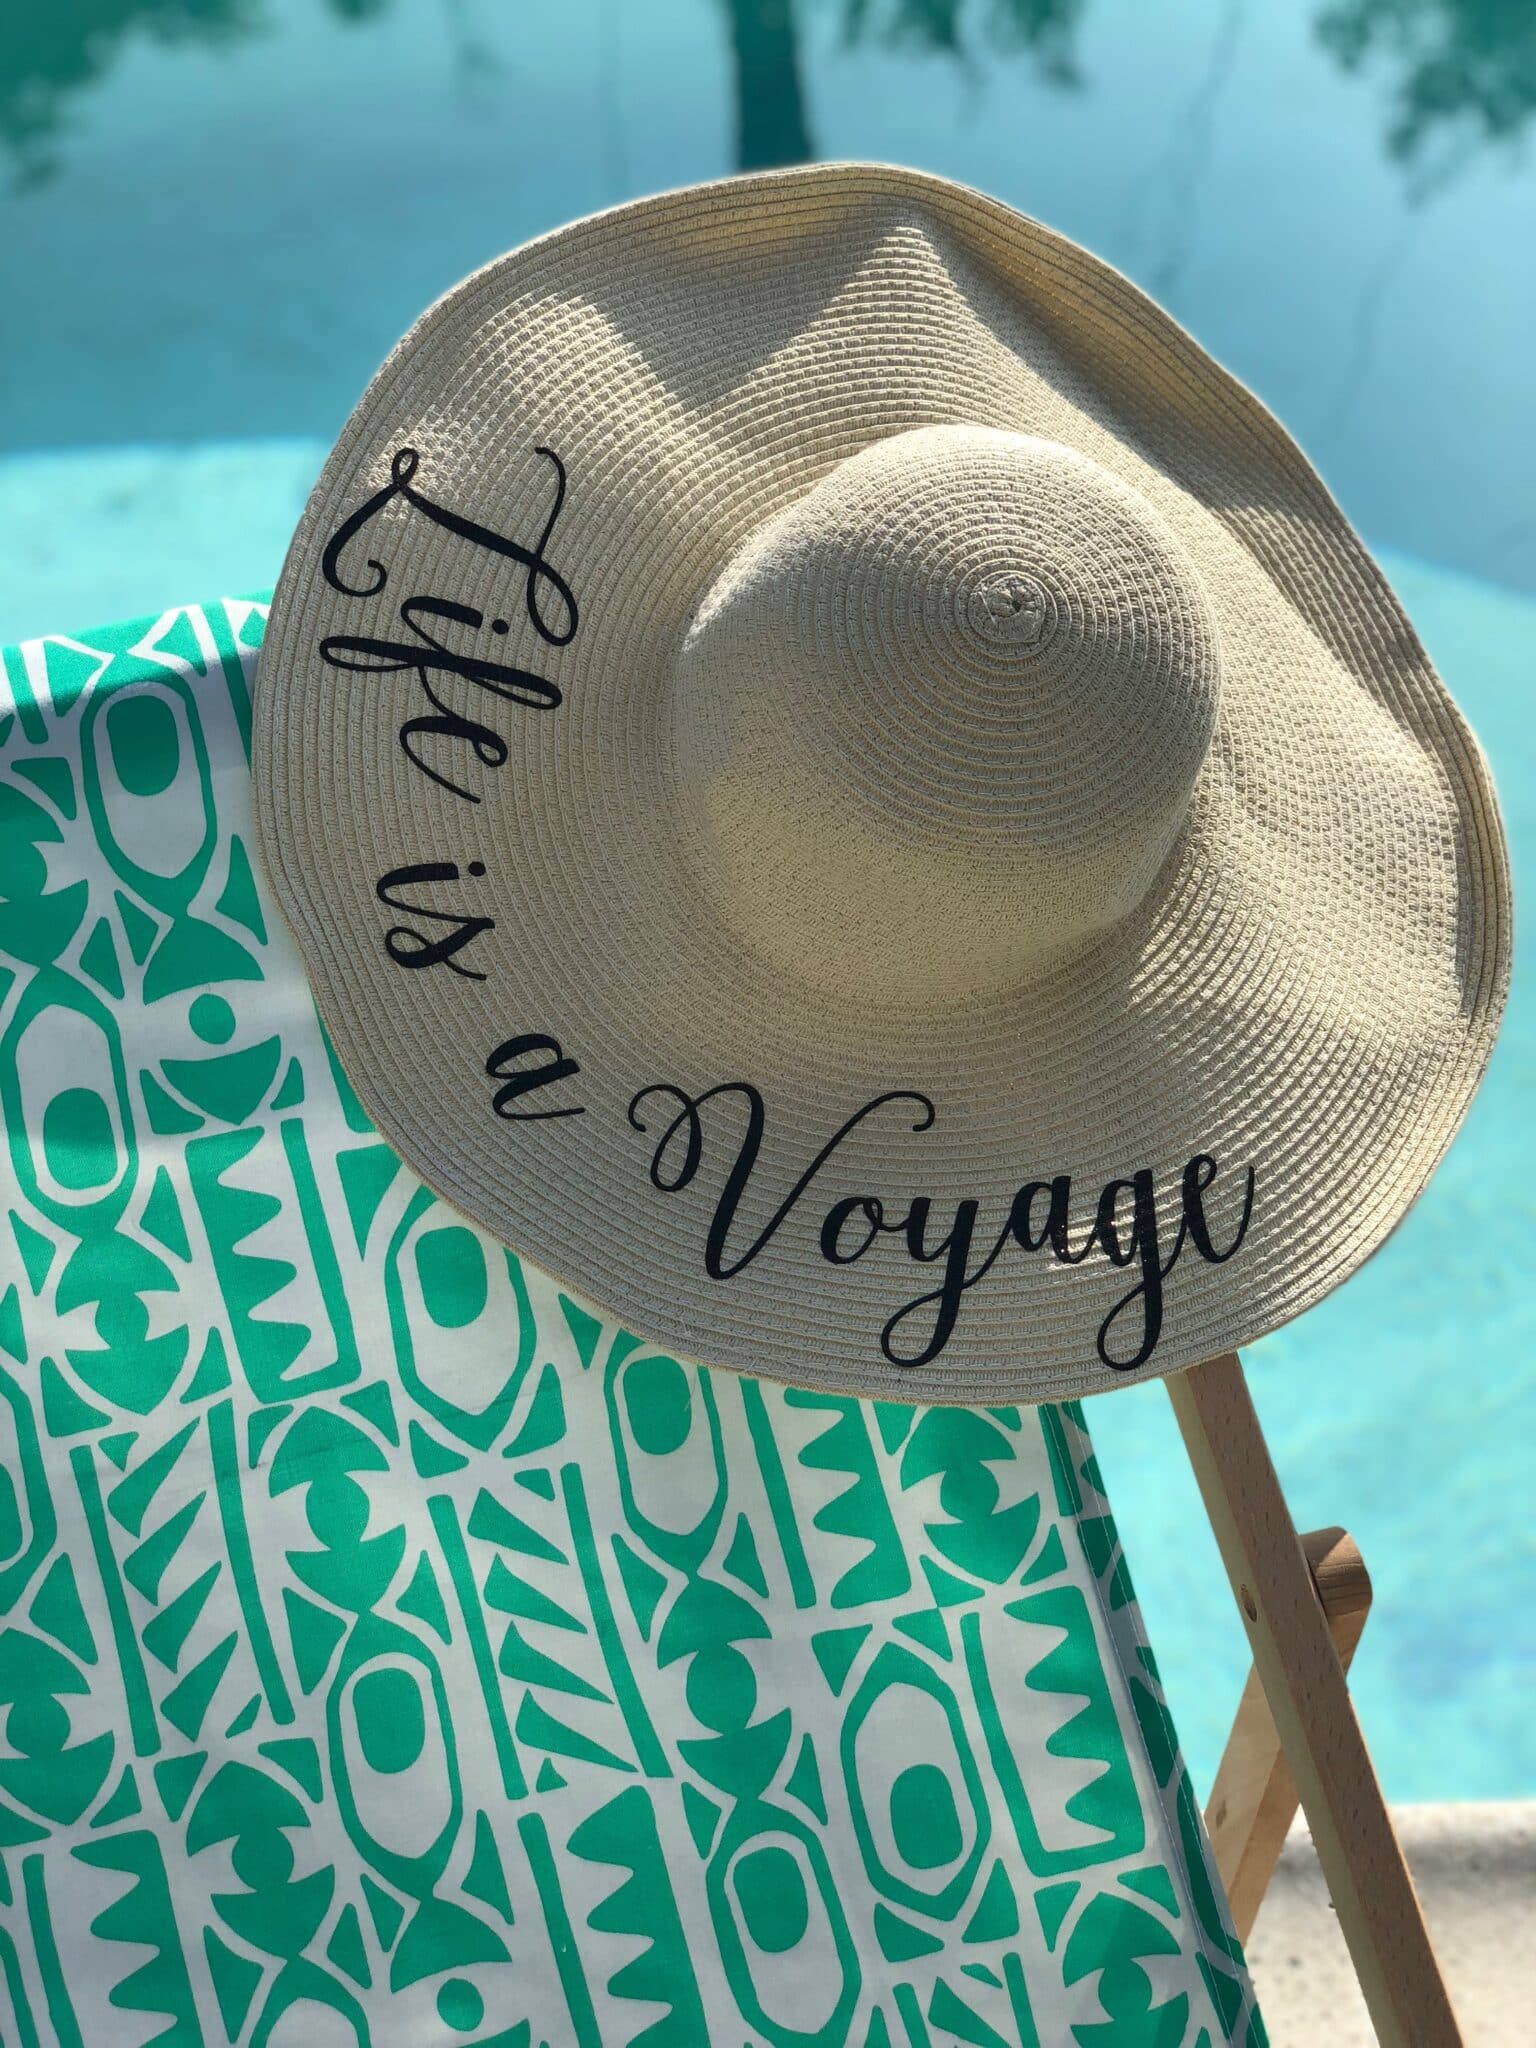 healthy voyager "life is a voyage" sunhat